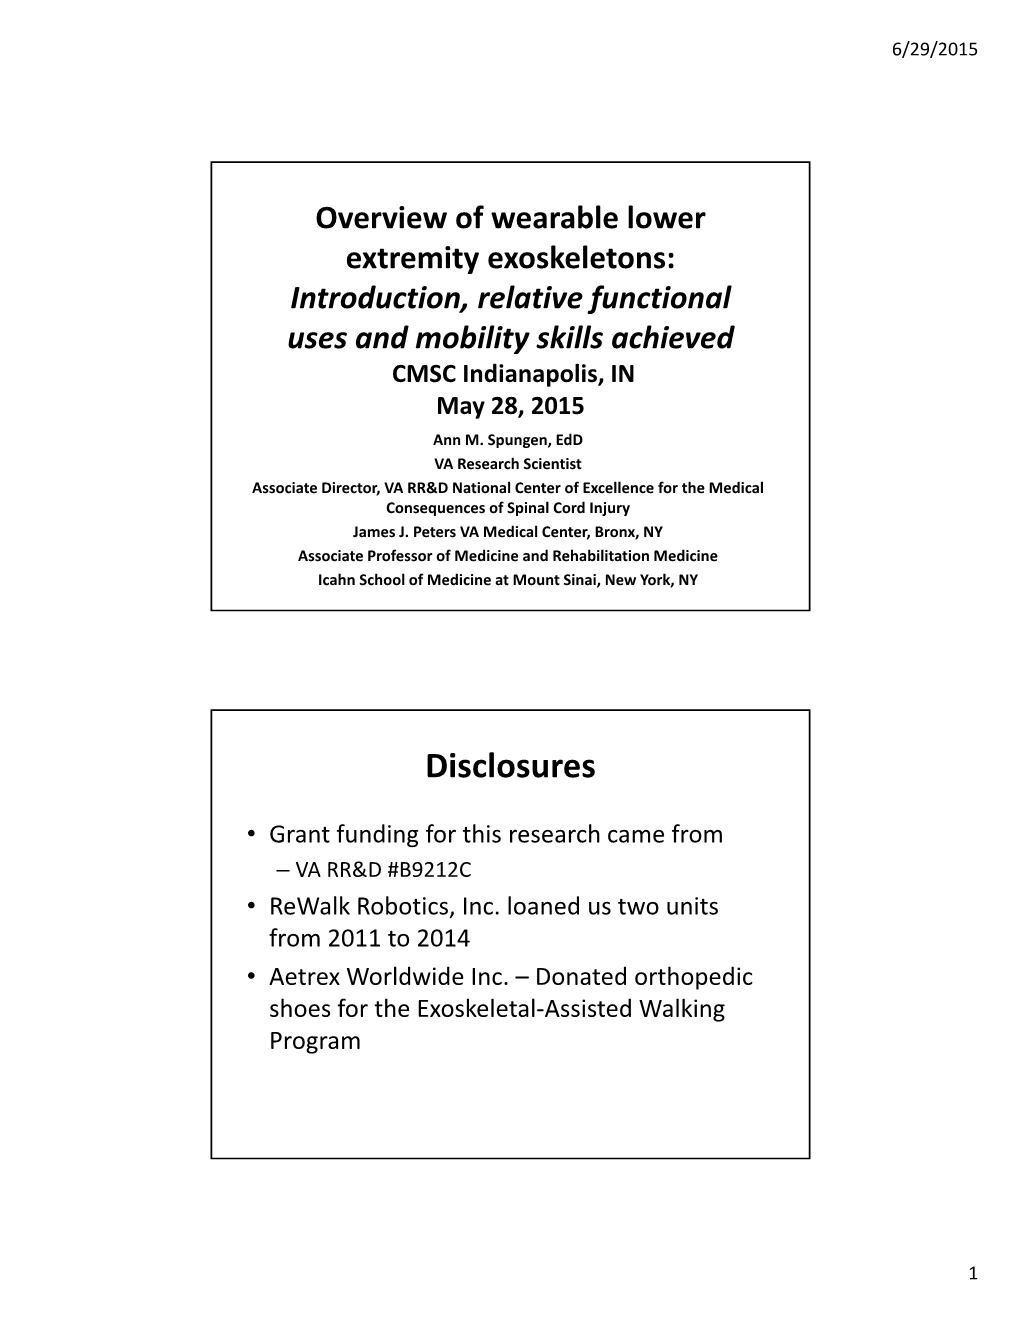 Overview of Wearable Lower Extremity Exoskeletons: Introduction, Relative Functional Uses and Mobility Skills Achieved CMSC Indianapolis, in May 28, 2015 Ann M